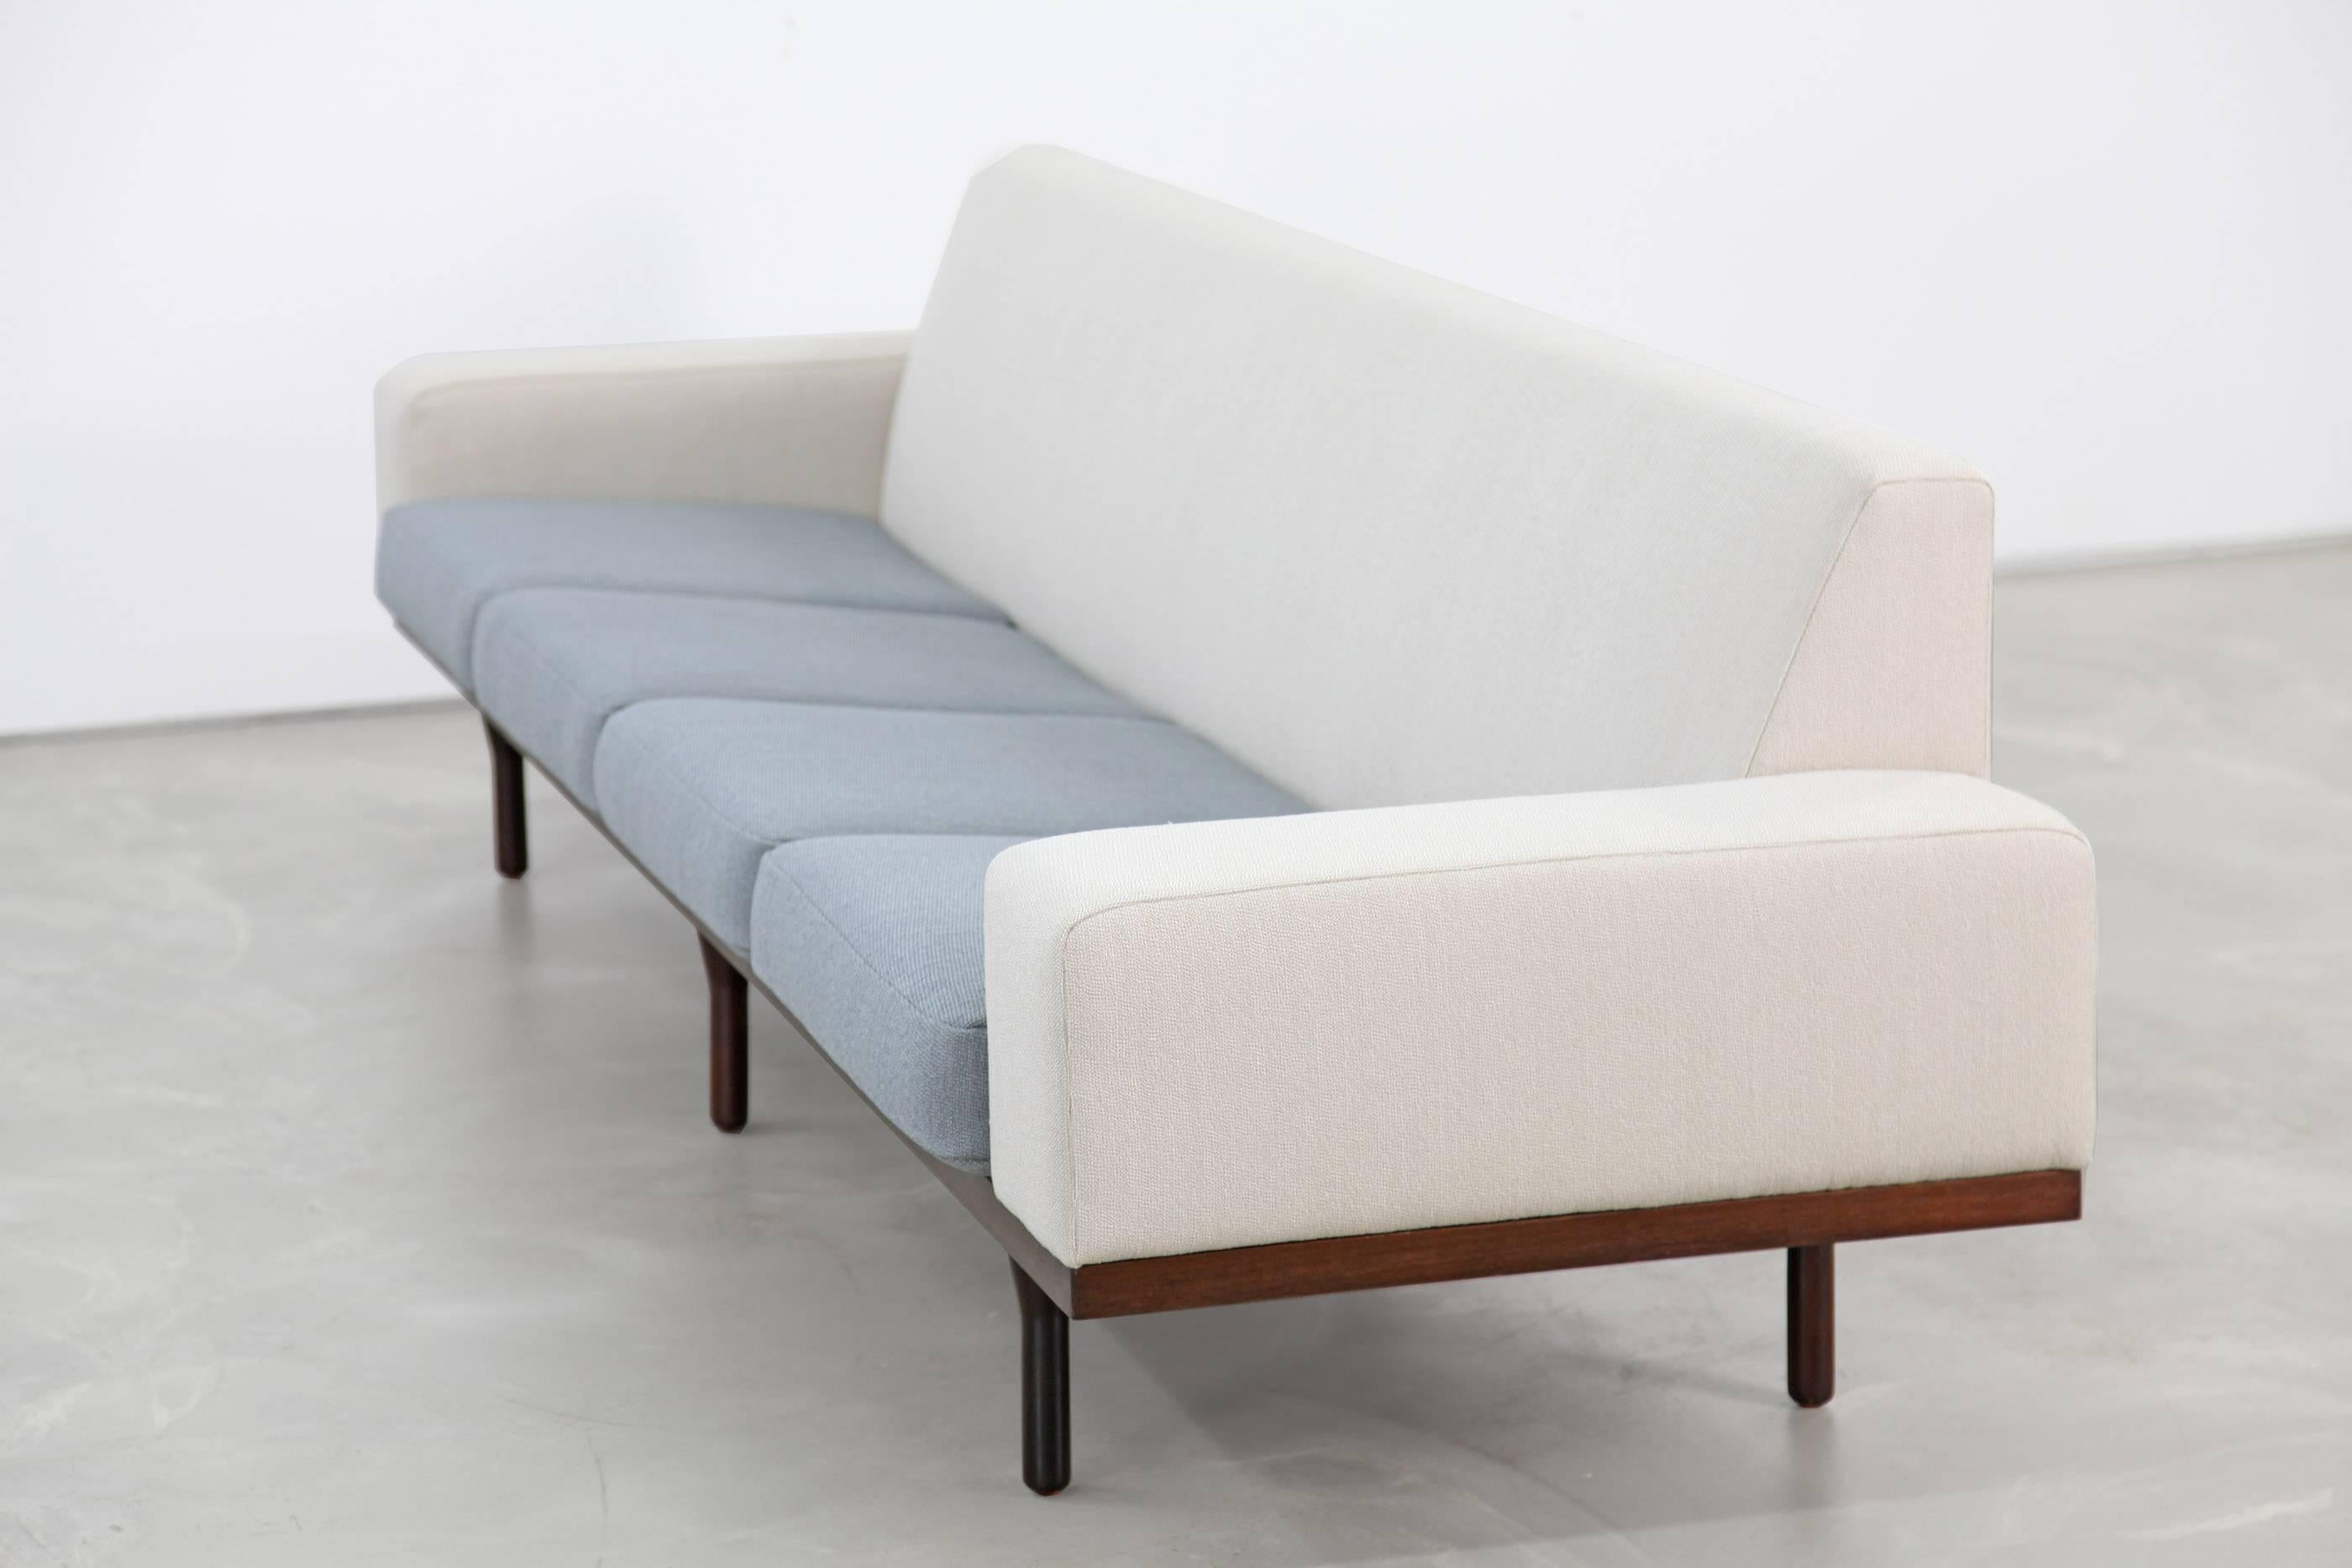 20th Century Four-Seat Sofa and Lounge Chair by Illum Wikkelsø for Eilersen, Denmark, 1960s